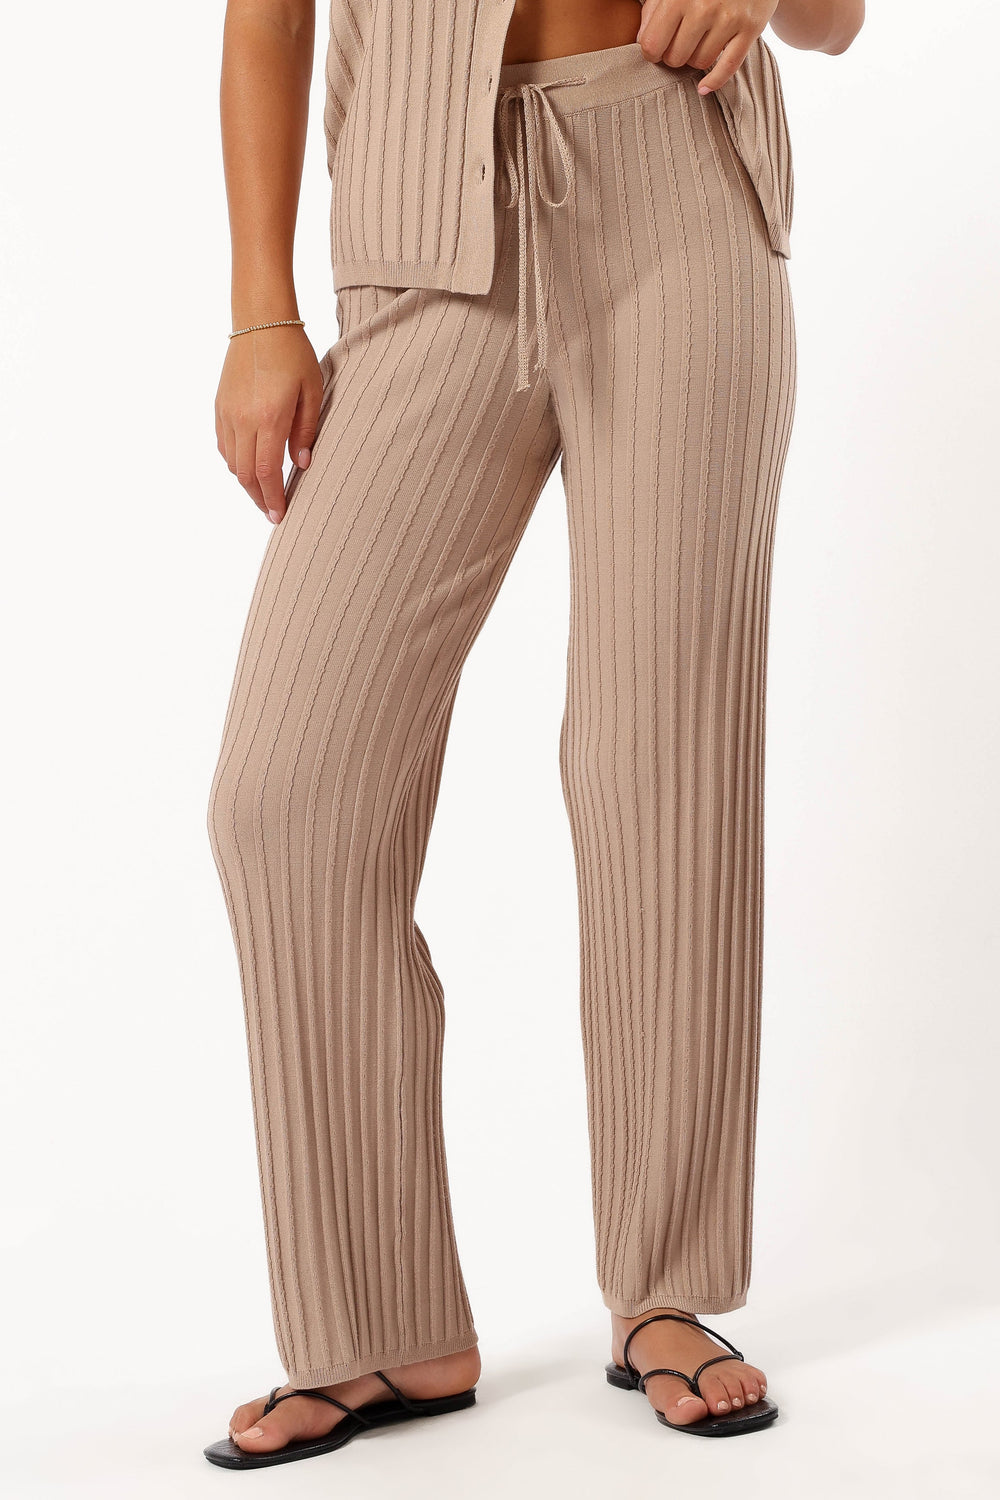 BOTTOMS @Tibi Ribbed Pant - Beige (Hold for Cool Beginnings)